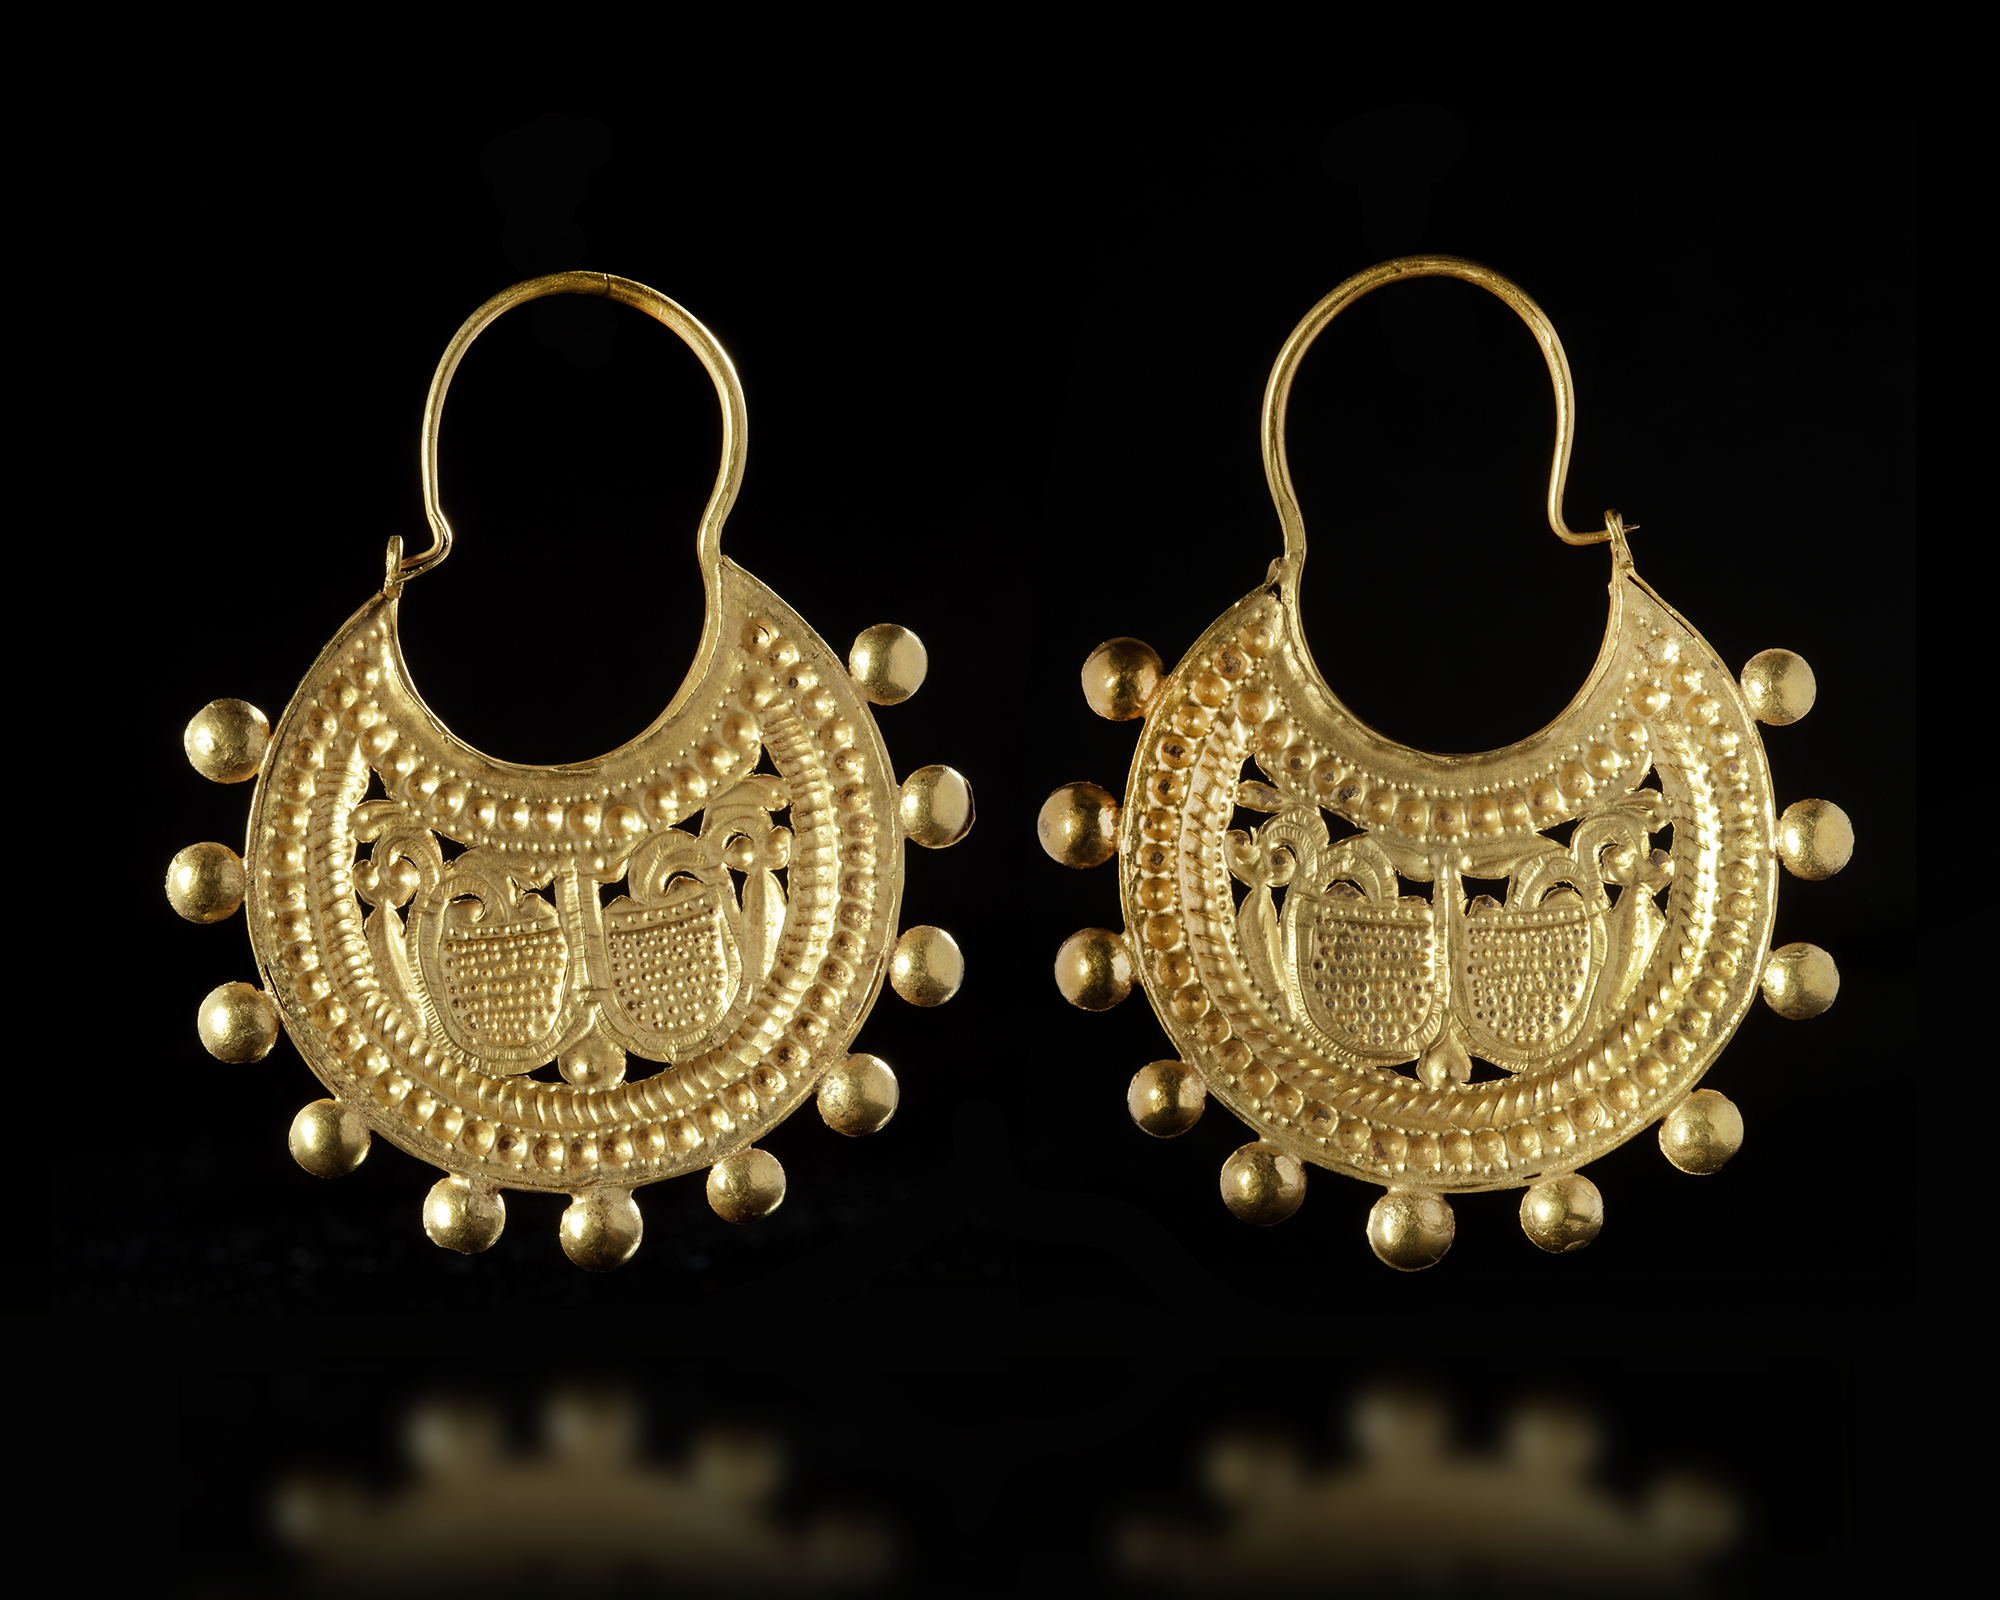 A PAIR OF BYZANTINE GOLD LUNATE EARRINGS, 6TH-7TH CENTURY AD - Image 4 of 4